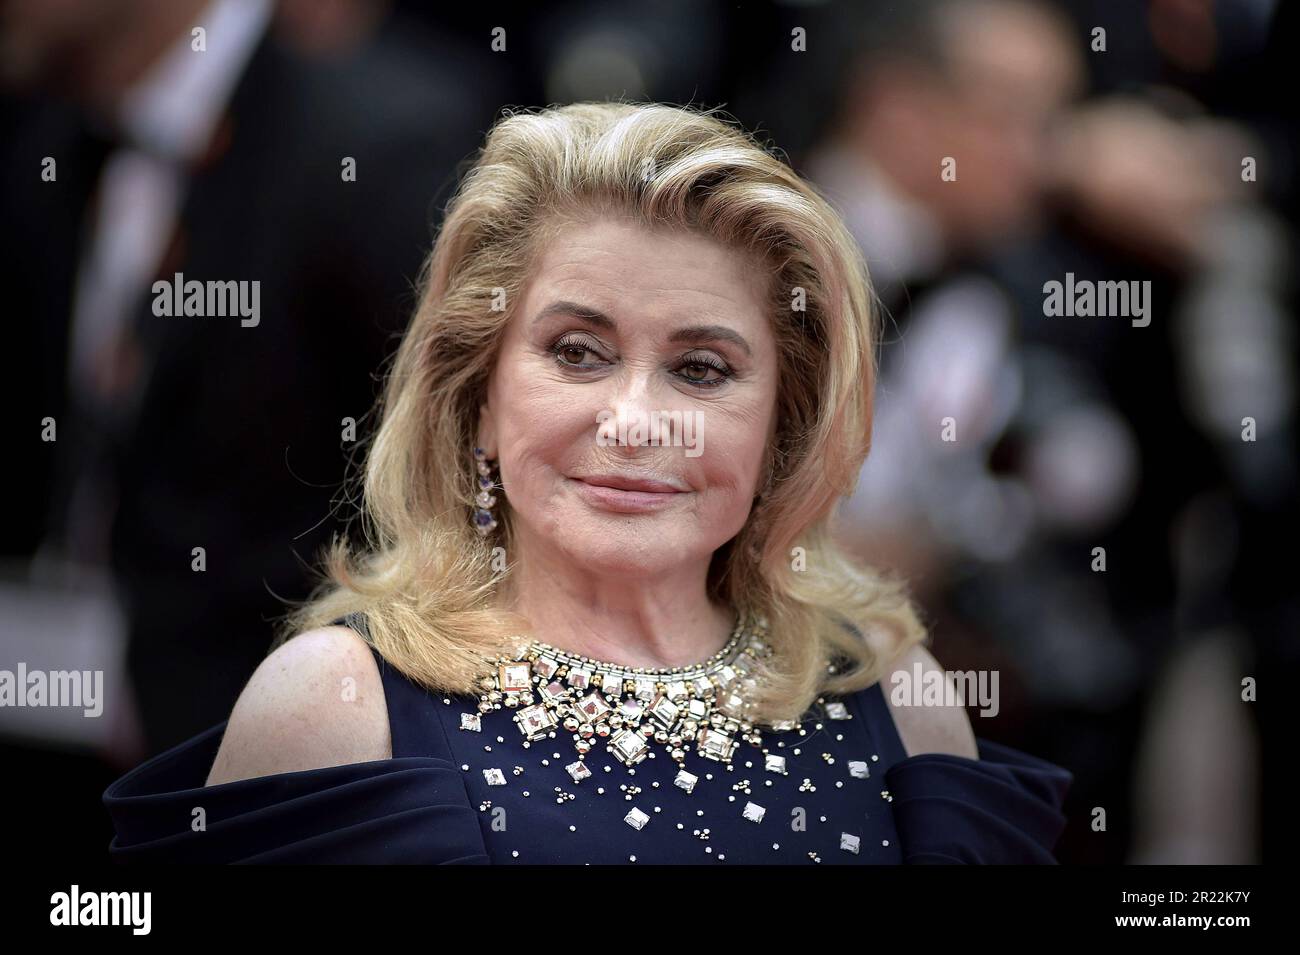 Cannes, France. 16th May, 2023. Catherine Deneuve attends the Opening Gala and premiere of Jeanne du Barry at the 76th Cannes Film Festival at Palais des Festivals in Cannes, France on Tuesday, May 16, 2023. Photo by Rocco Spaziani/ Credit: UPI/Alamy Live News Stock Photo